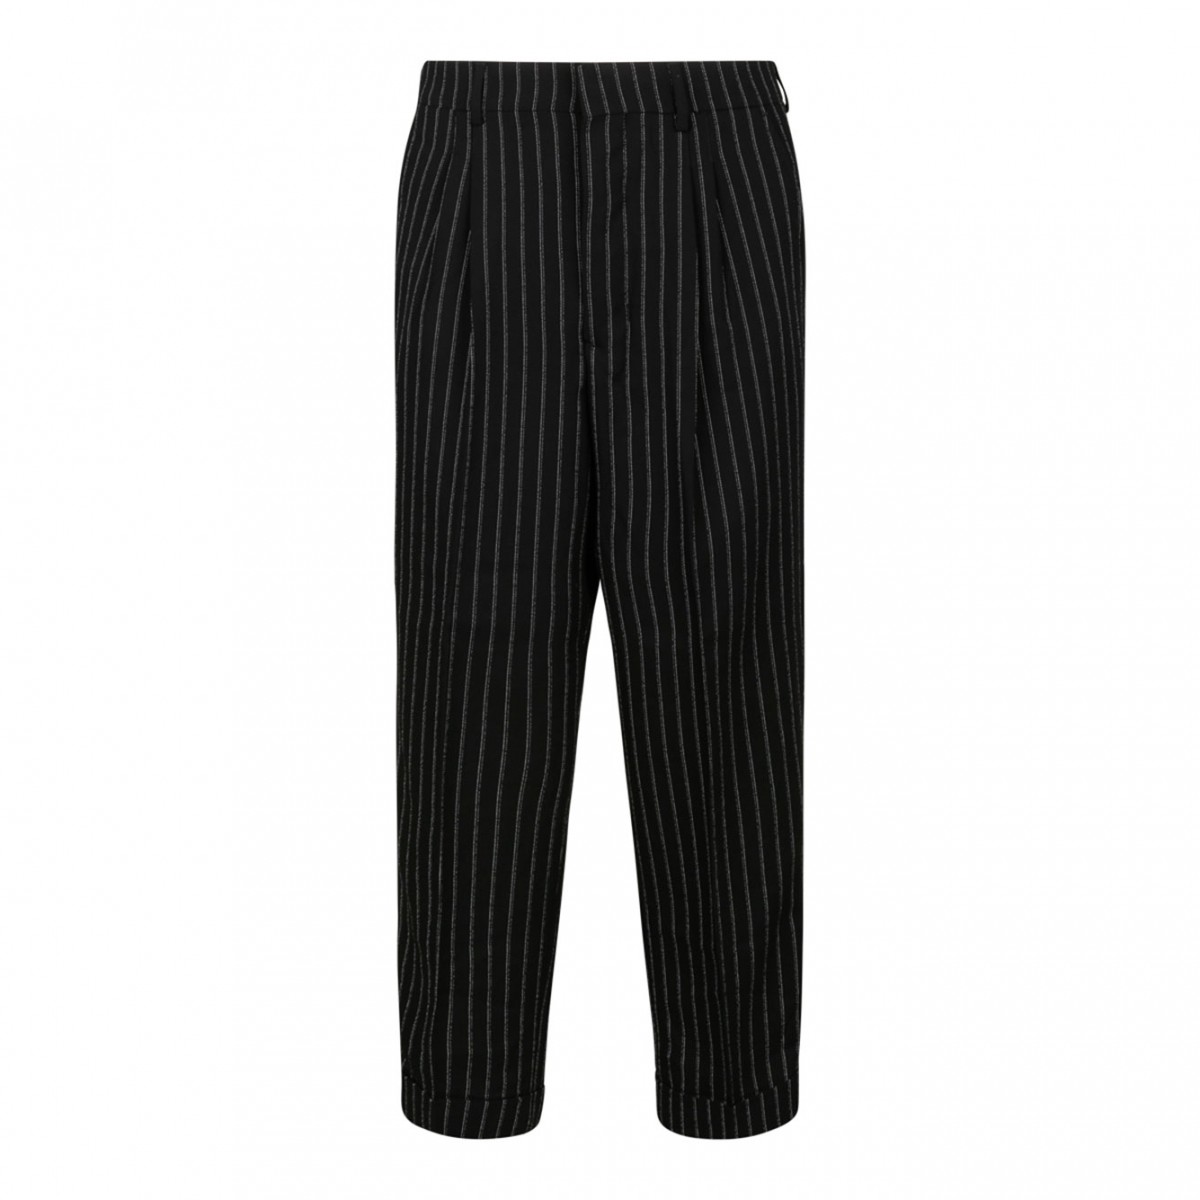 Black Carrot Fit Trousers